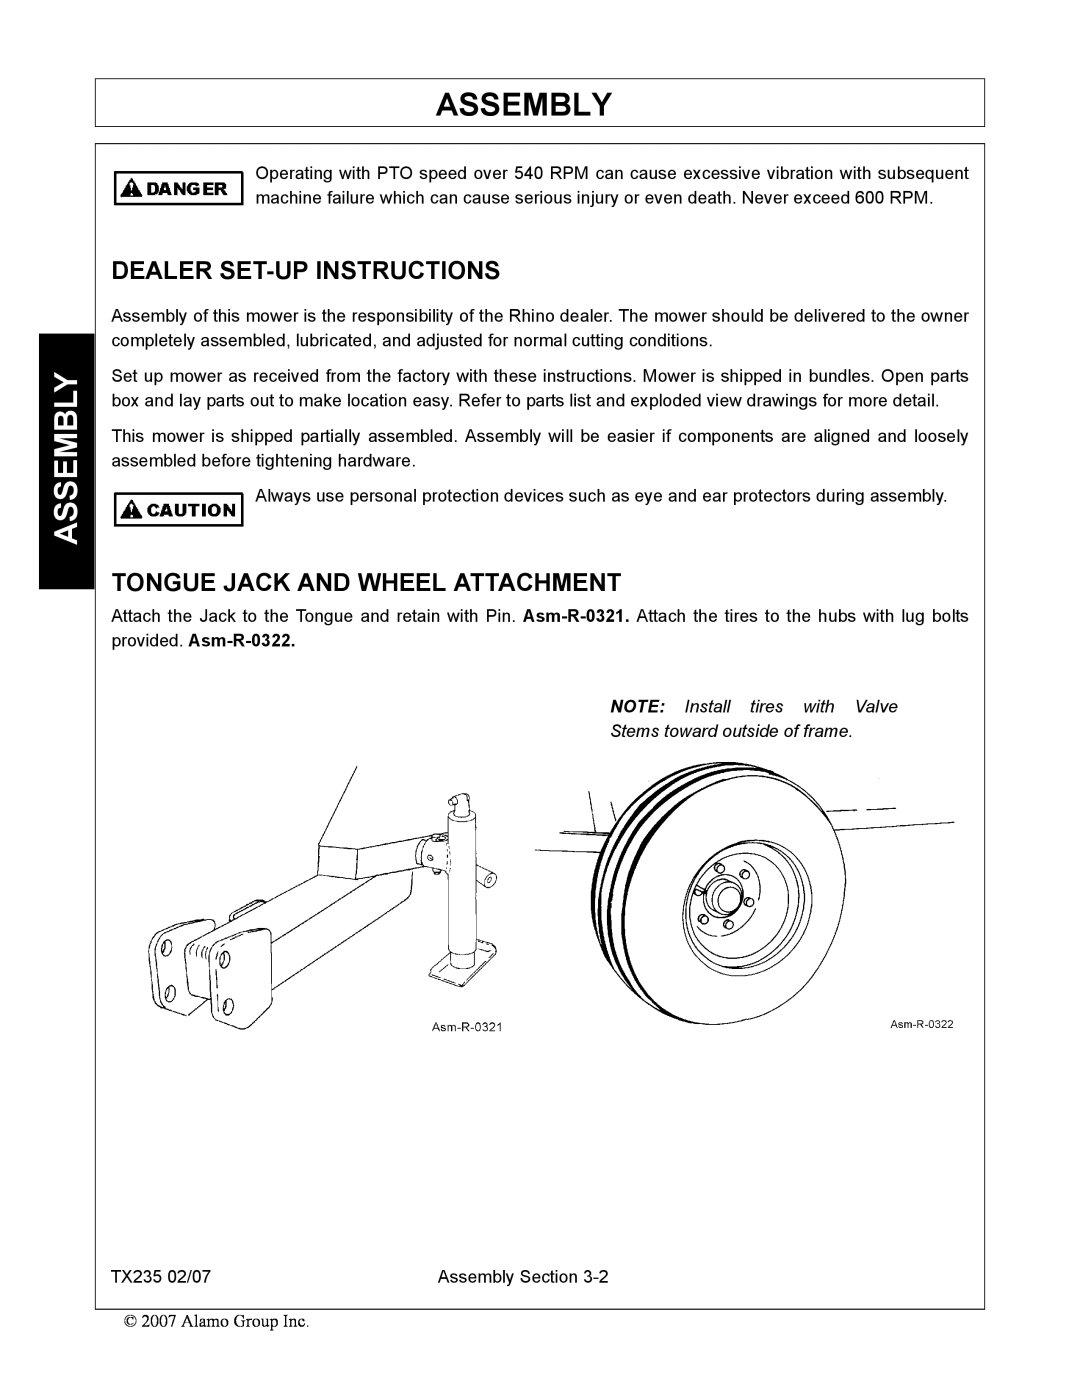 Alamo TX235 manual Assembly, Dealer Set-Up Instructions, Tongue Jack And Wheel Attachment 